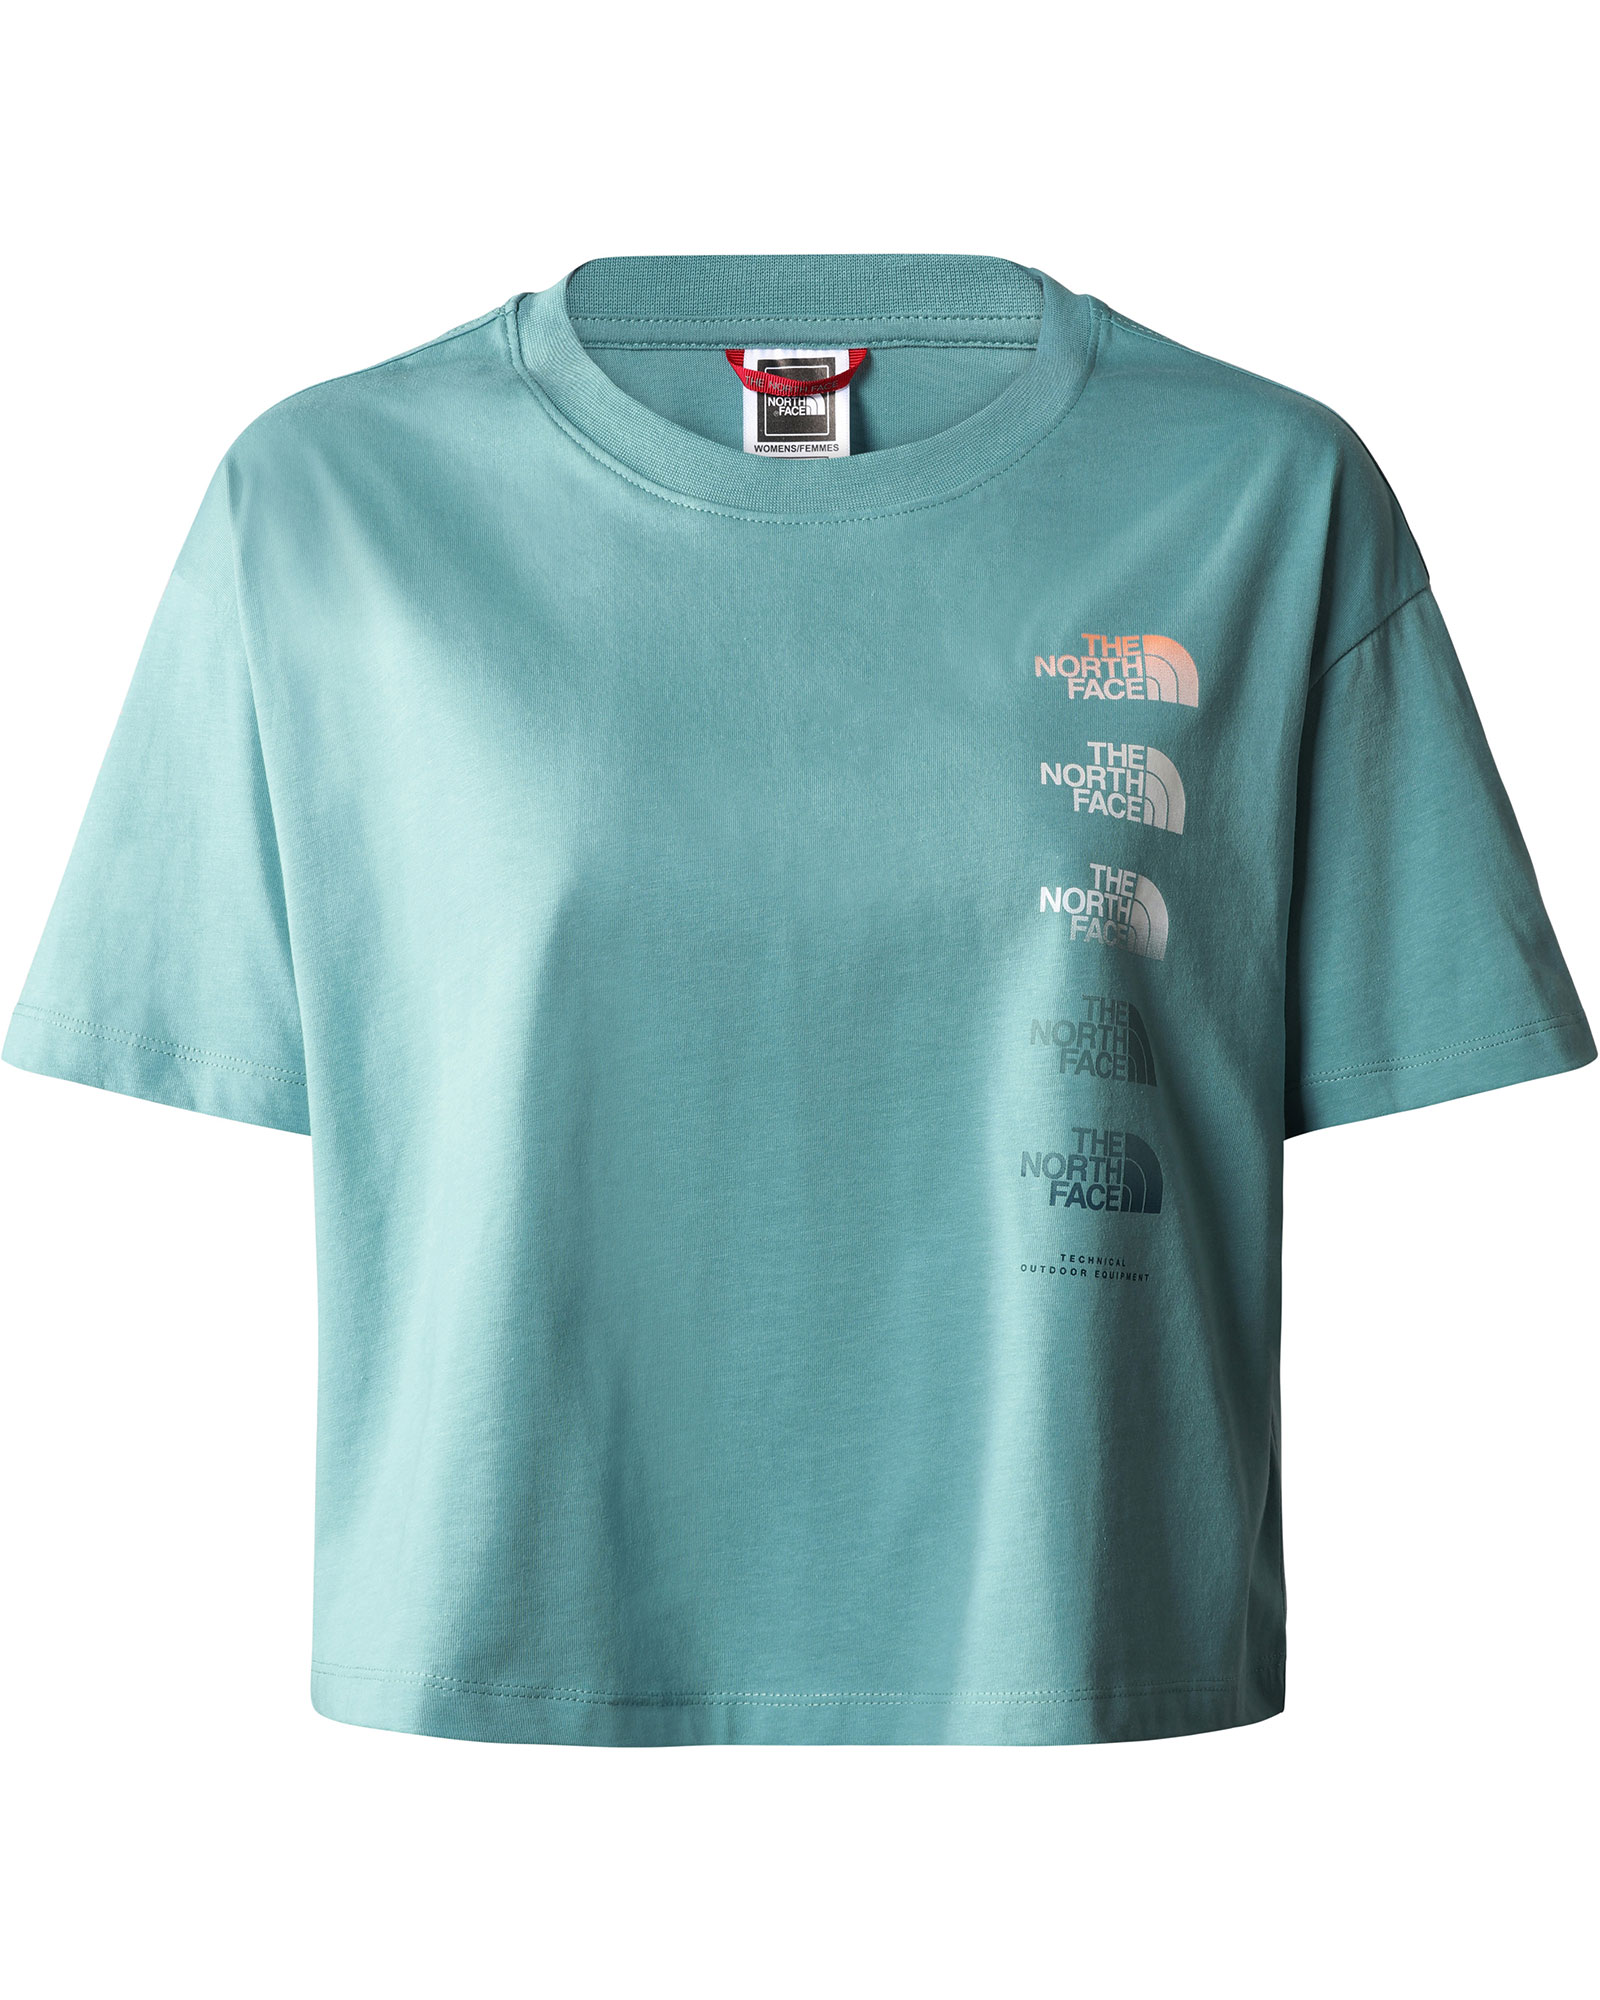 The North Face Women’s D2 Graphic Crop T Shirt - Reef Waters M